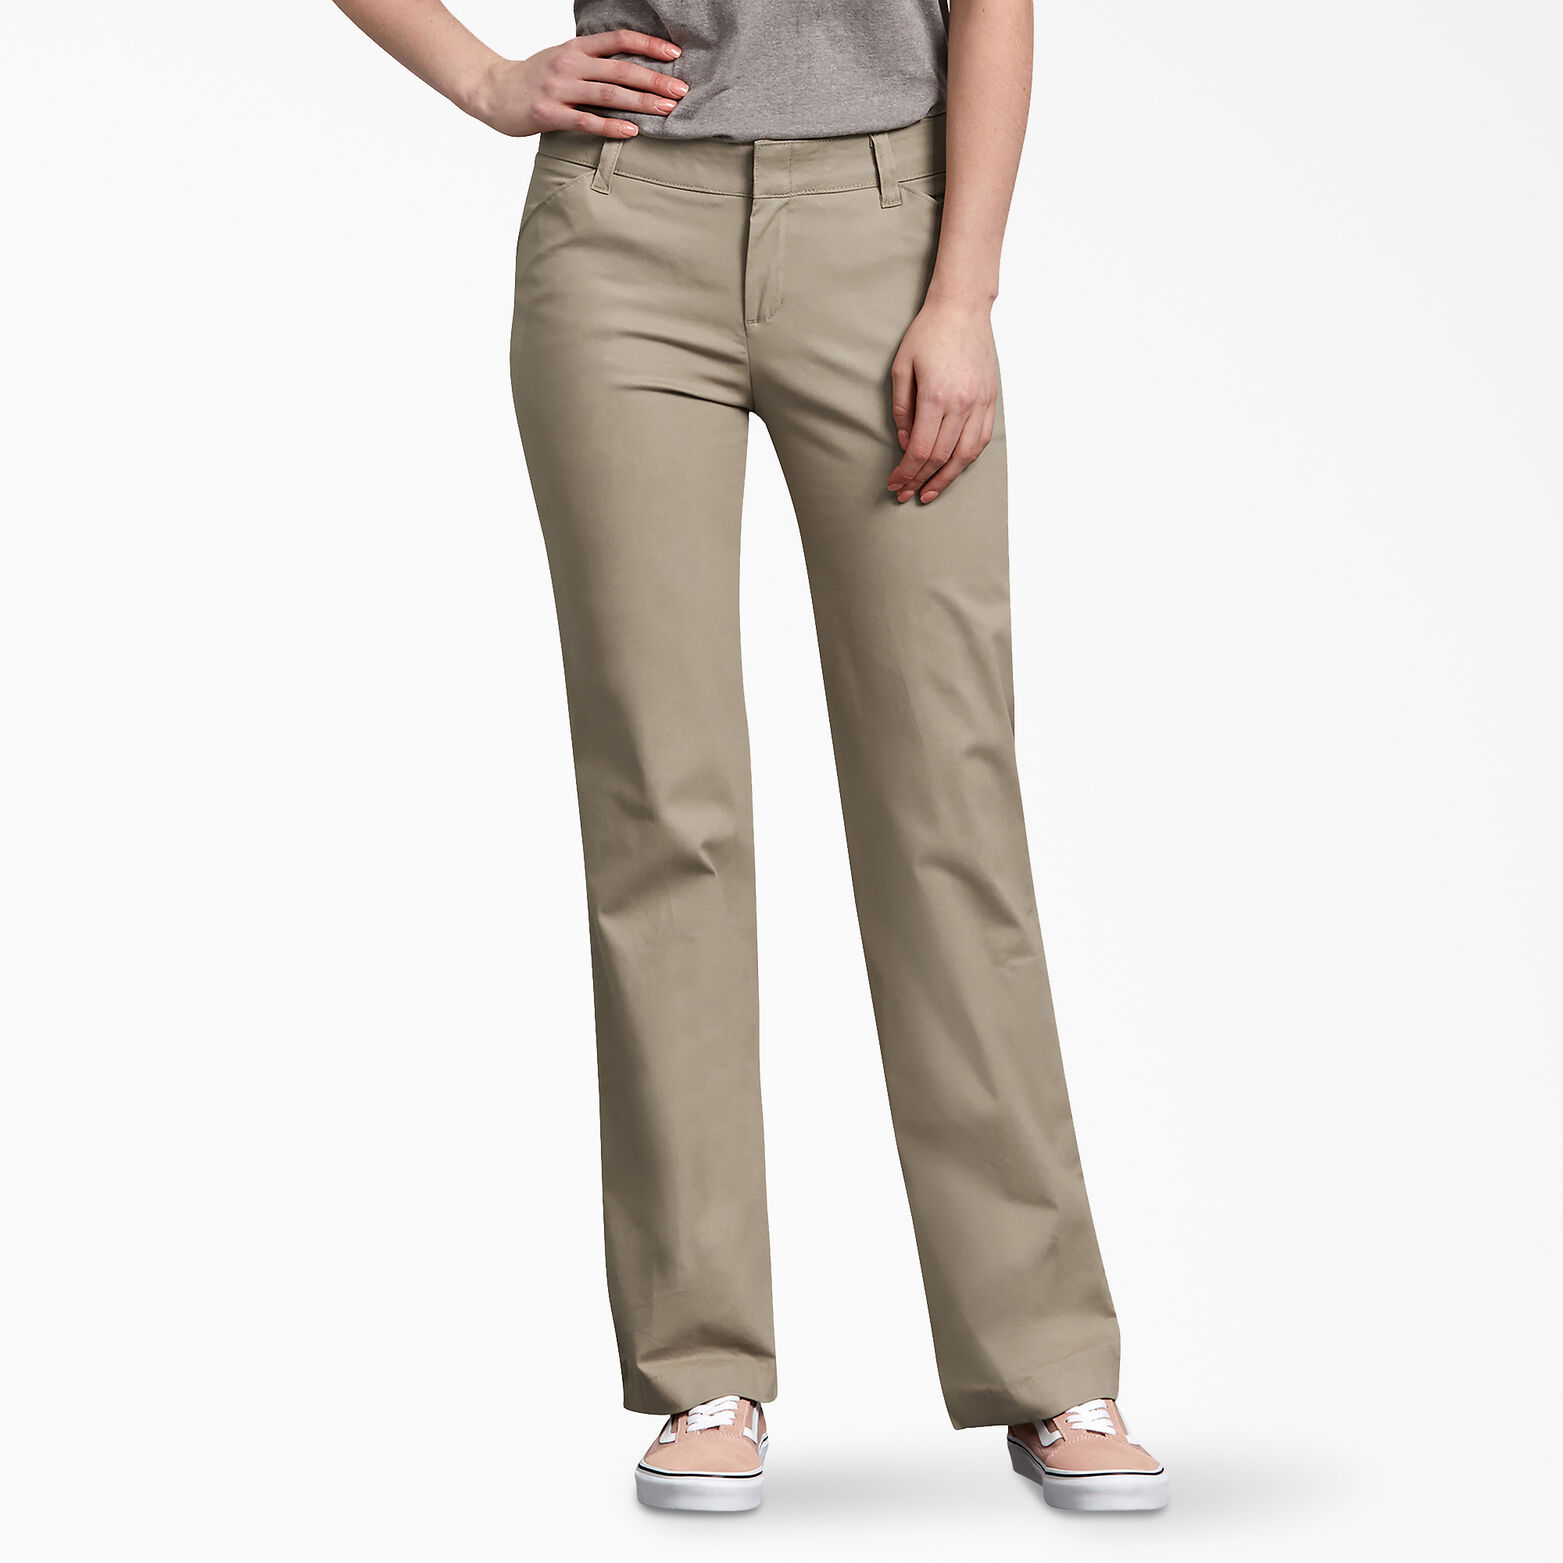 Dickies Occupational Workwear FP322BK10UU FP322 Womens Relaxed Fit Flat ...